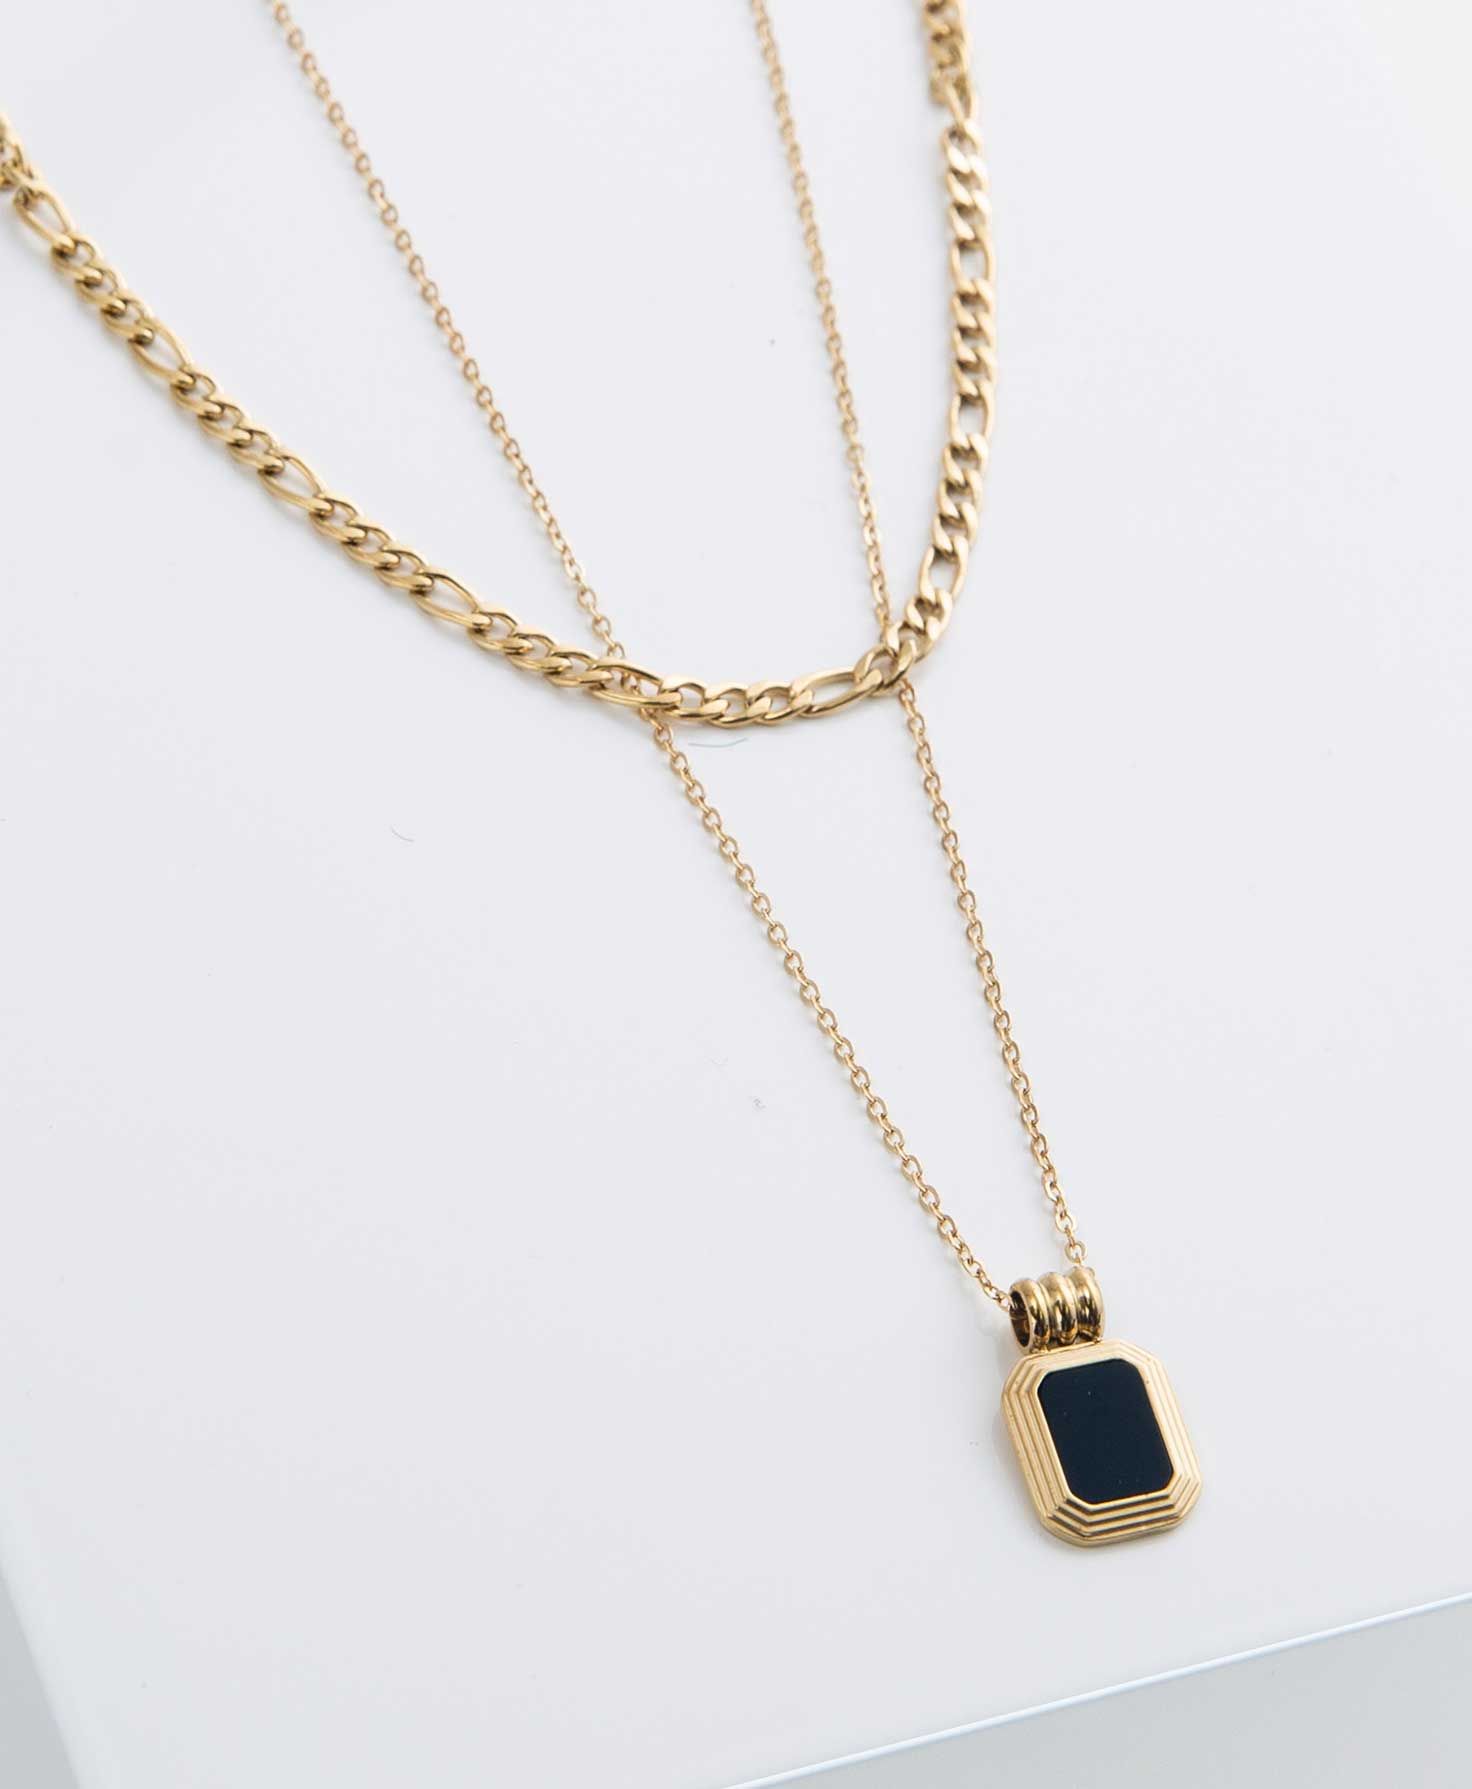 Ebony Necklace | Noonday Collection